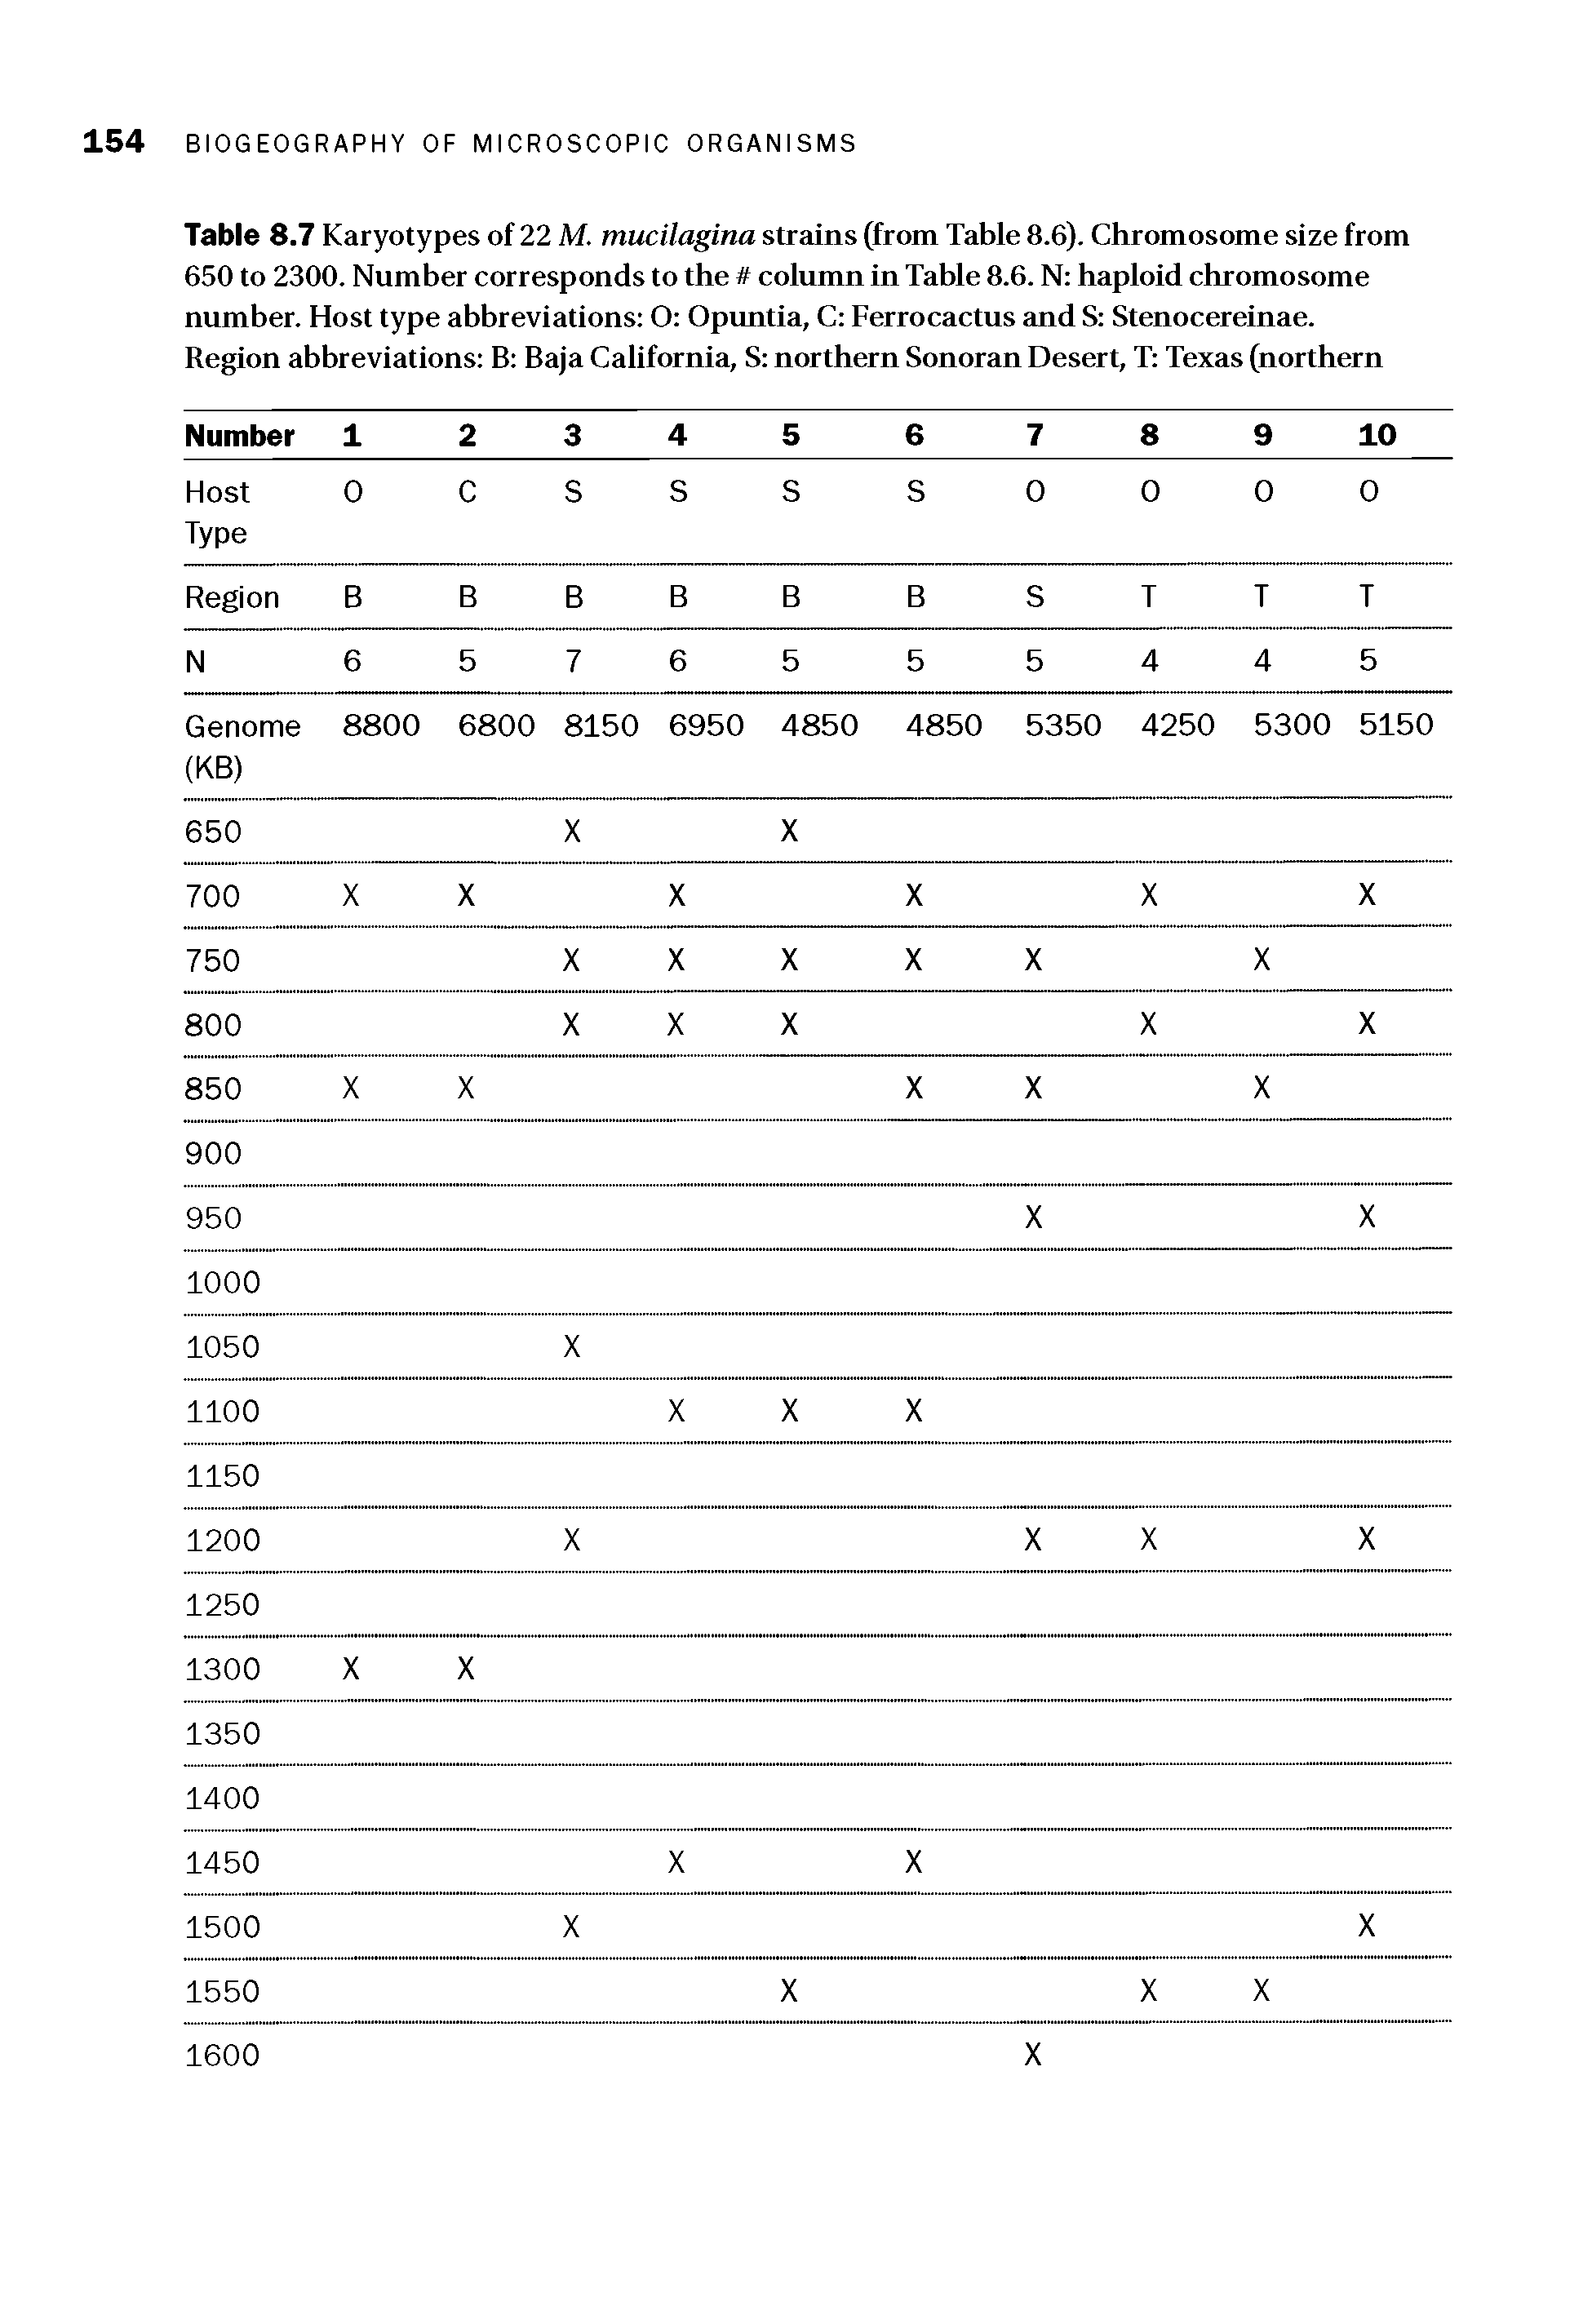 Table 8.7 Karyotypes of 22 M. mucilagina strains (from Table 8.6). Chromosome size from 650 to 2300. Number corresponds to the column in Table 8.6. N haploid chromosome number. Host type abbreviations O Opuntia, C Ferrocactus and S Stenocereinae.